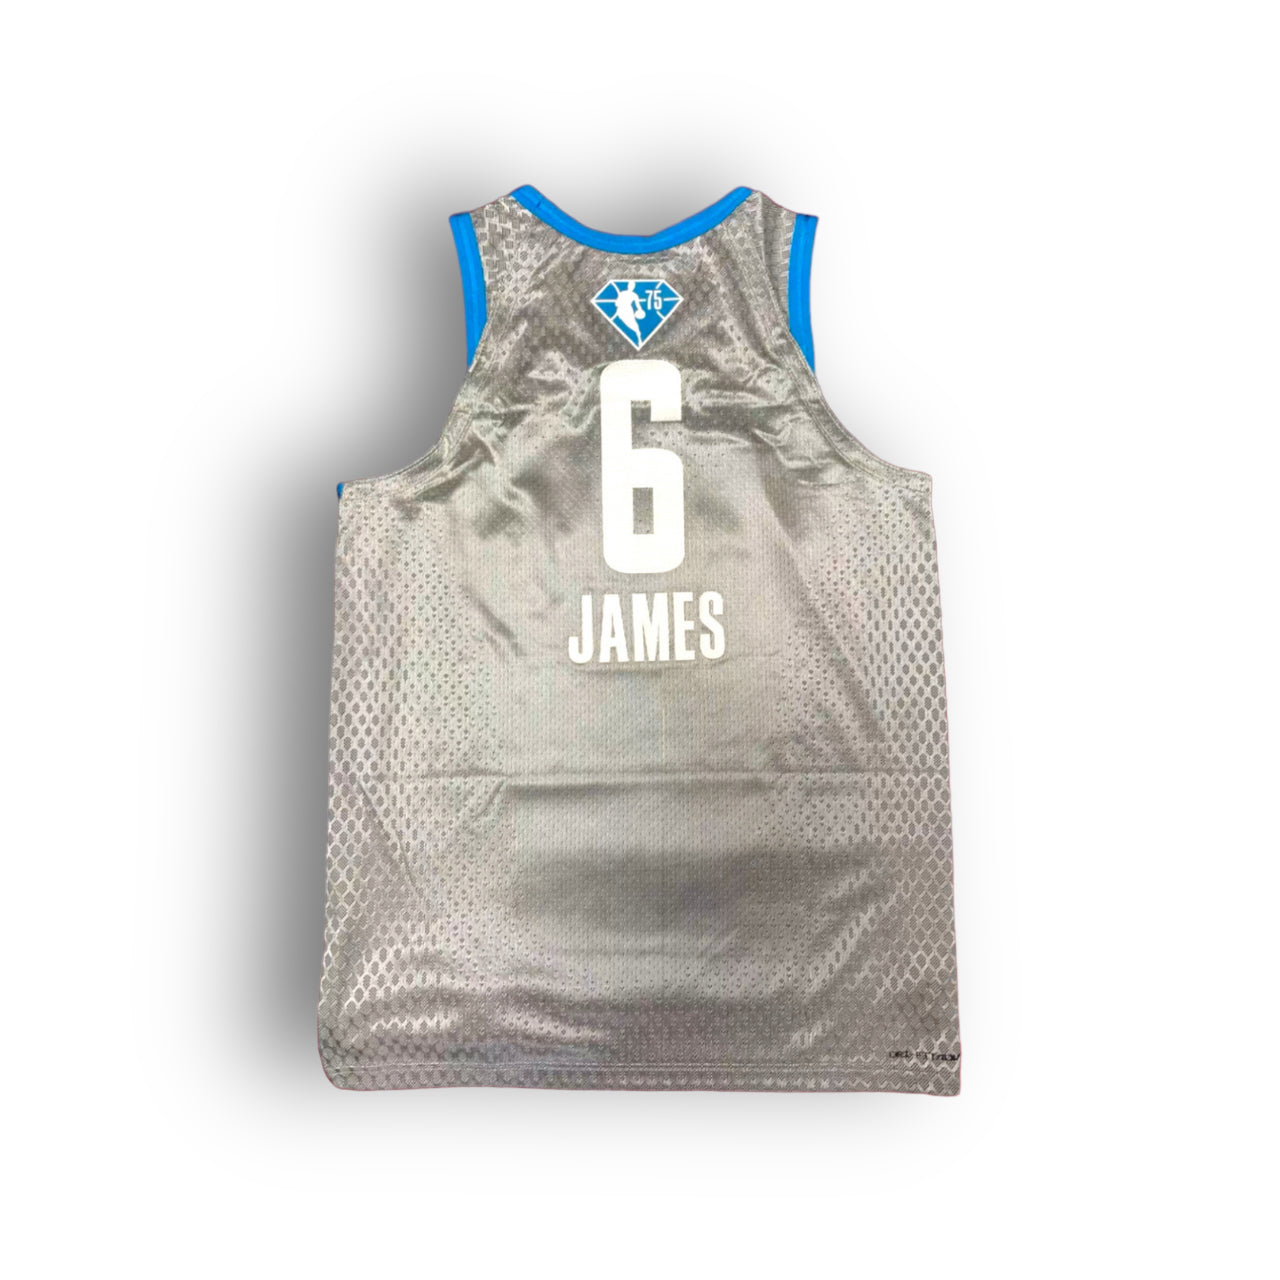 LeBron James 2021-2022 NBA All-Star Game Team LeBron Nike Authentic Jersey - Silver/Blue - Hoop Jersey Store